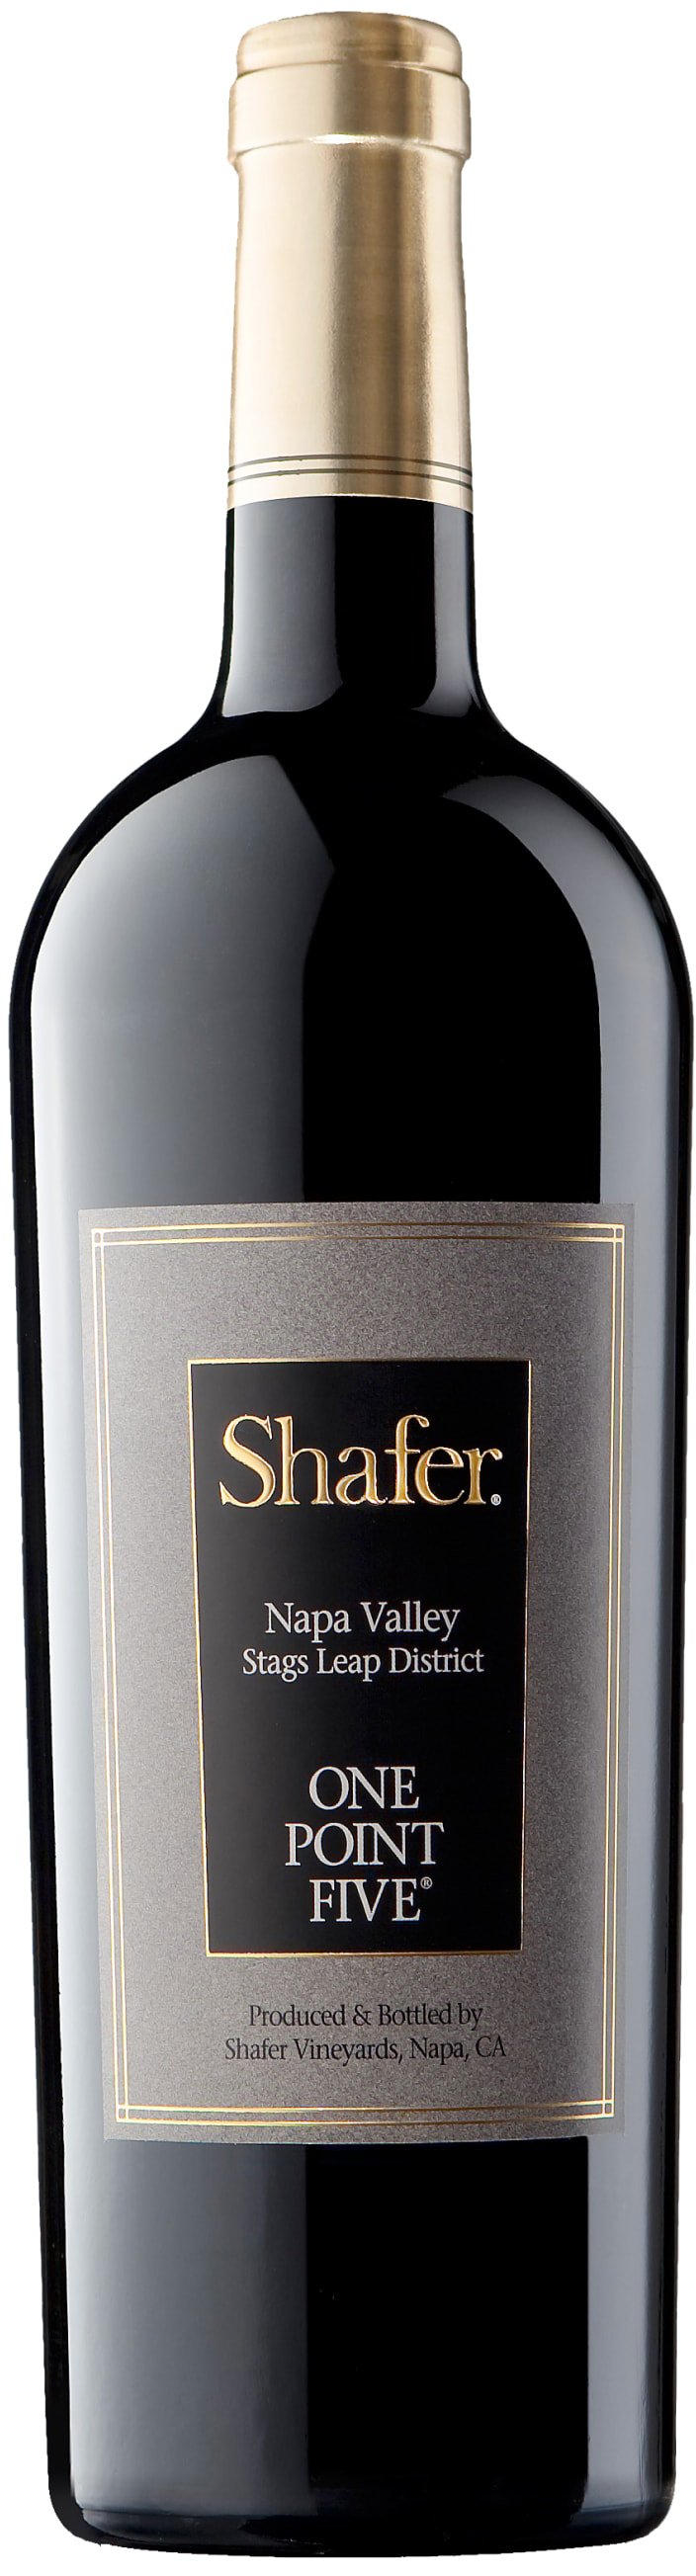 Shafer Napa Valley One Point Five Cabernet 2019